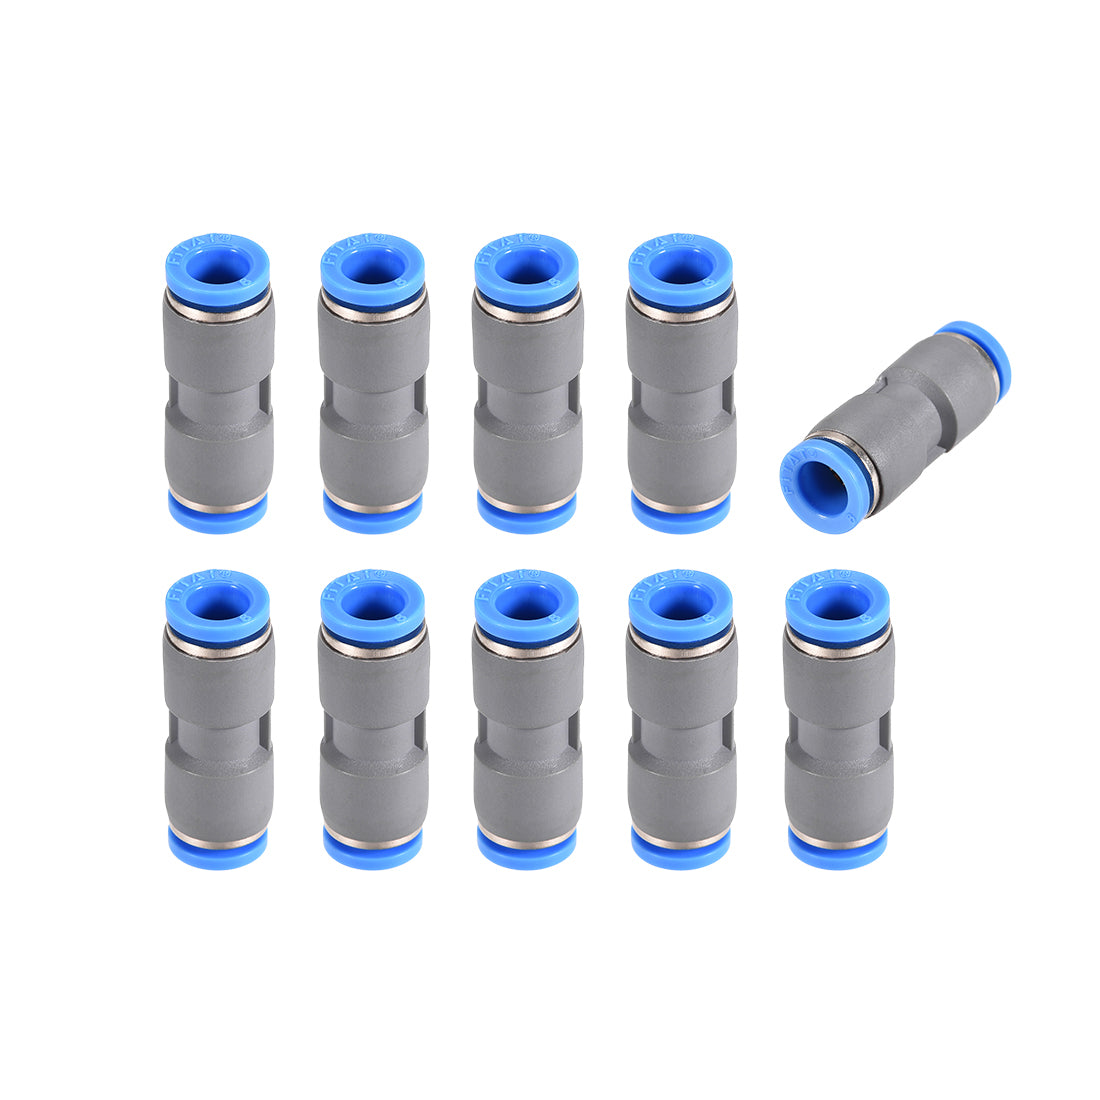 uxcell Uxcell Straight Push Connectors 8mm Quick Release Pneumatic Connector Plastic Union Pipe Tube Fitting Grey 10Pcs